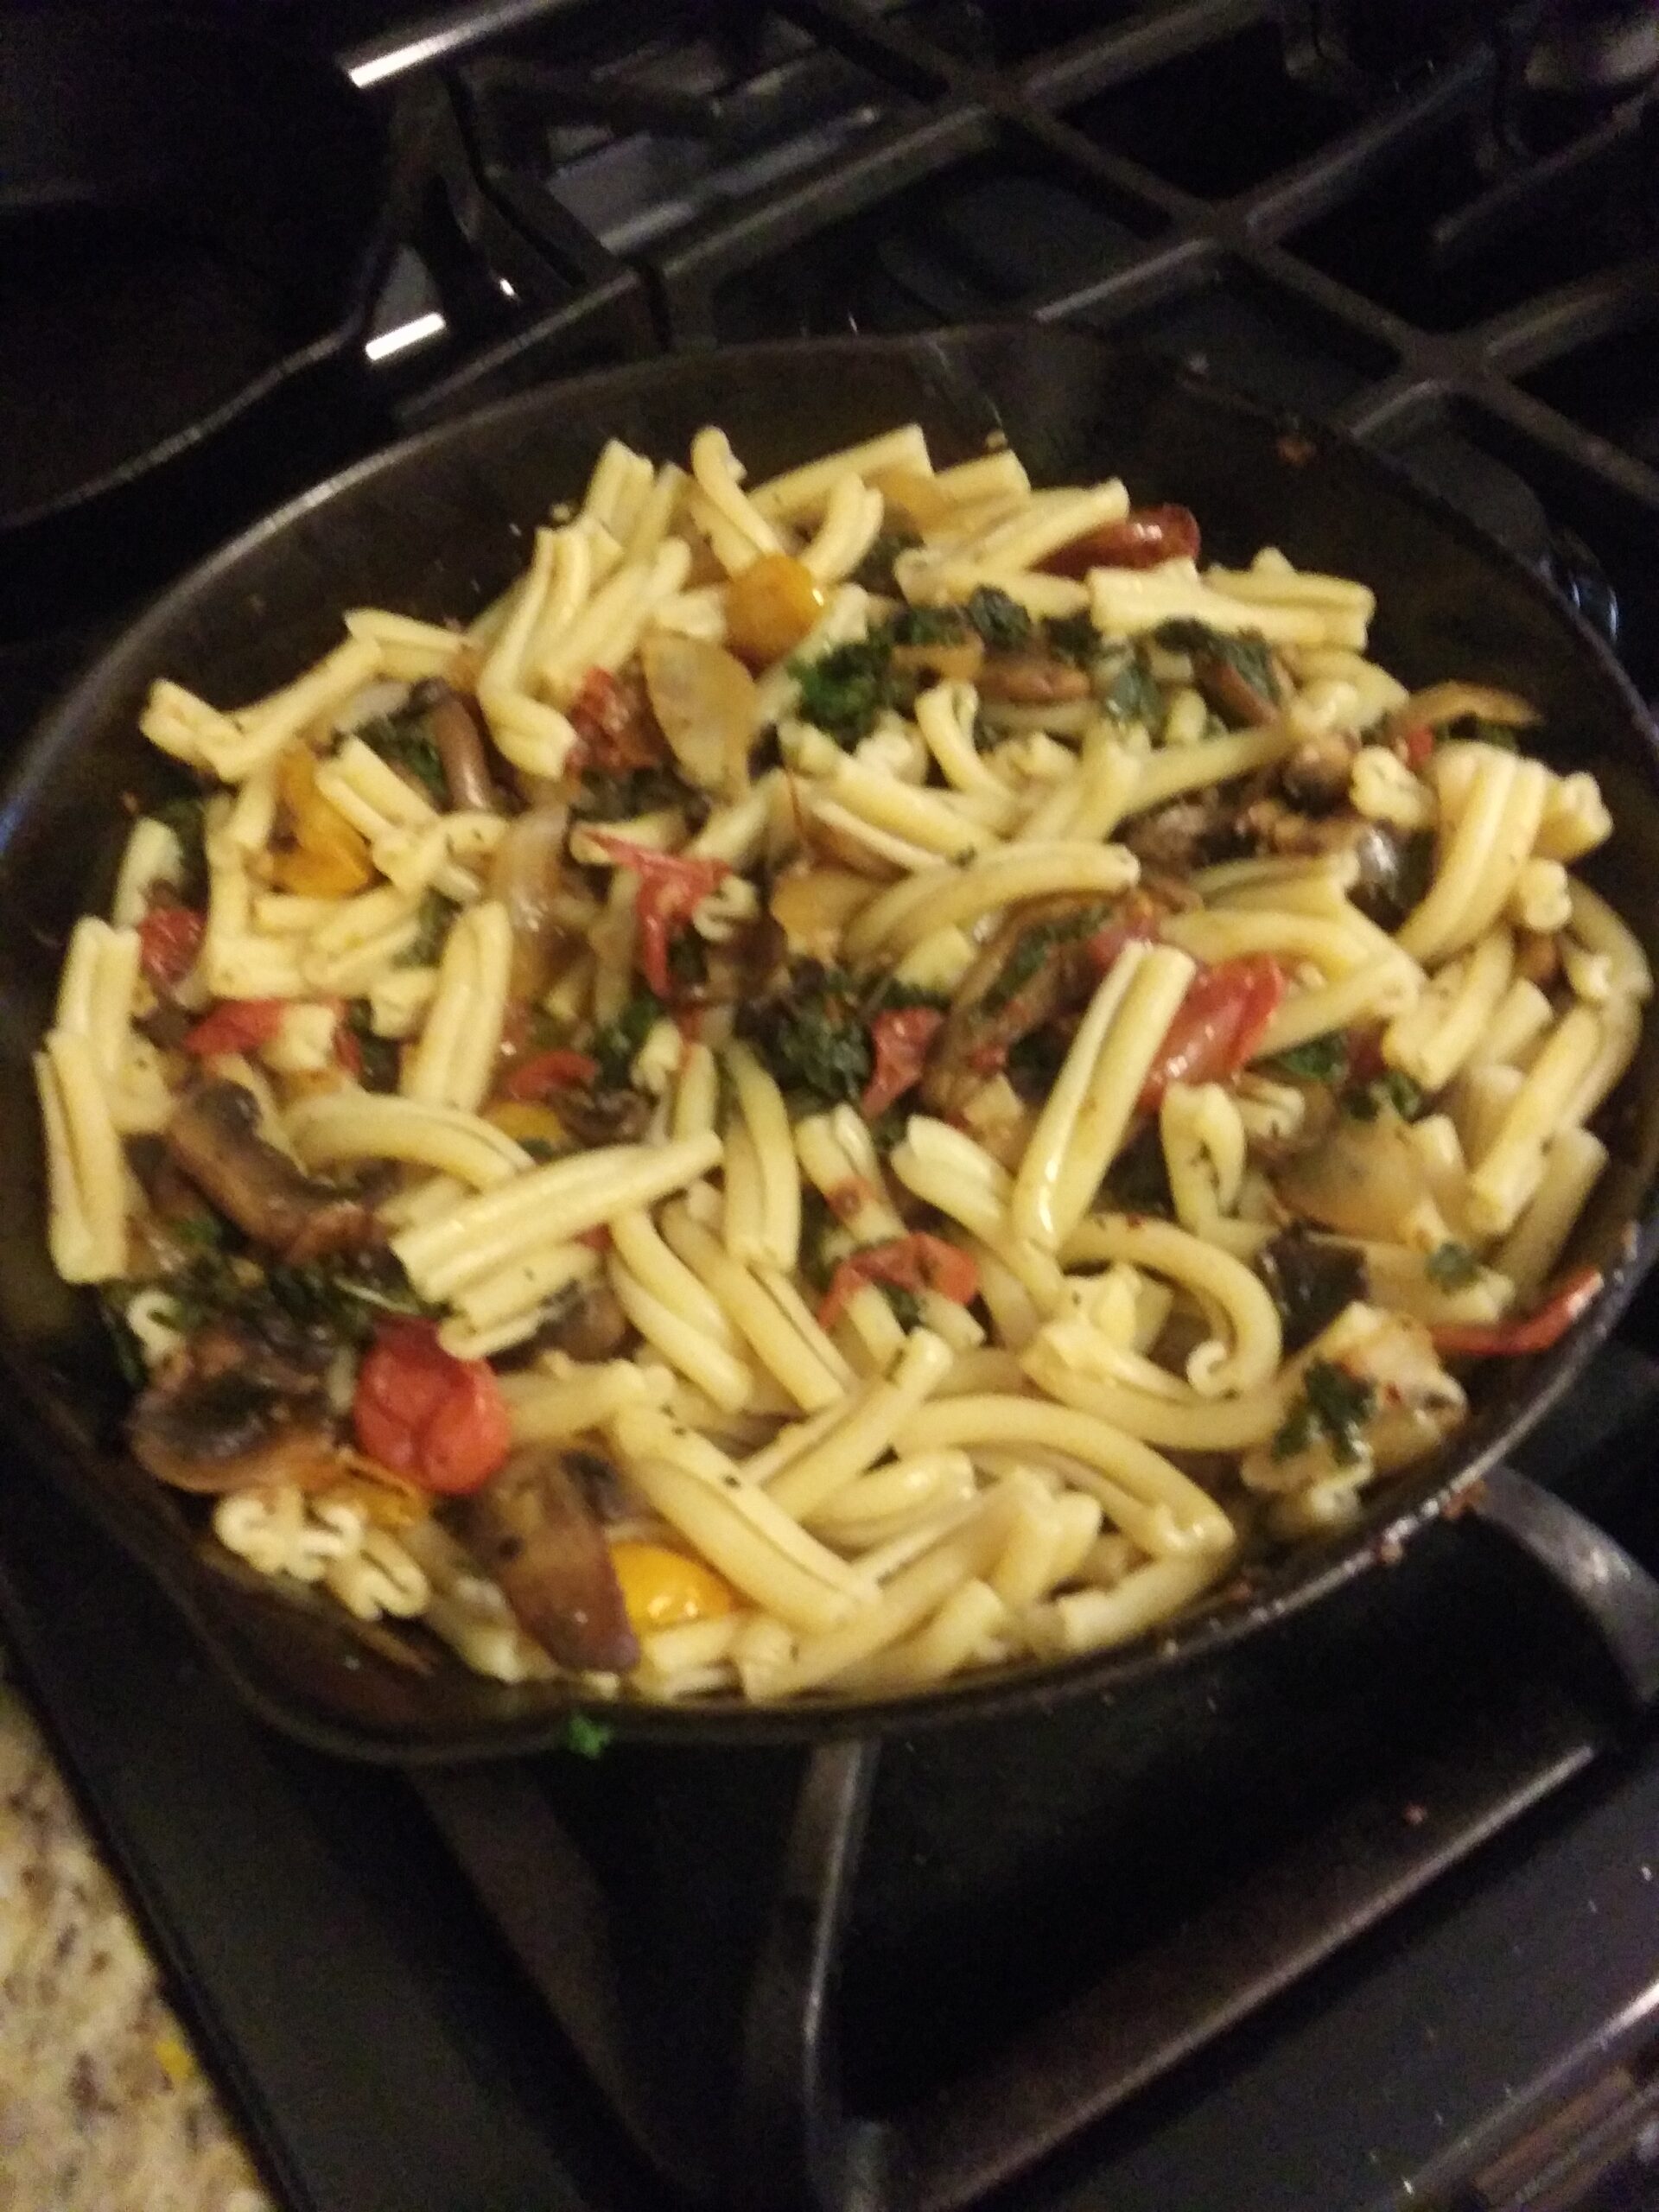 You are currently viewing Kale and Cherry Tomato Pasta Salad